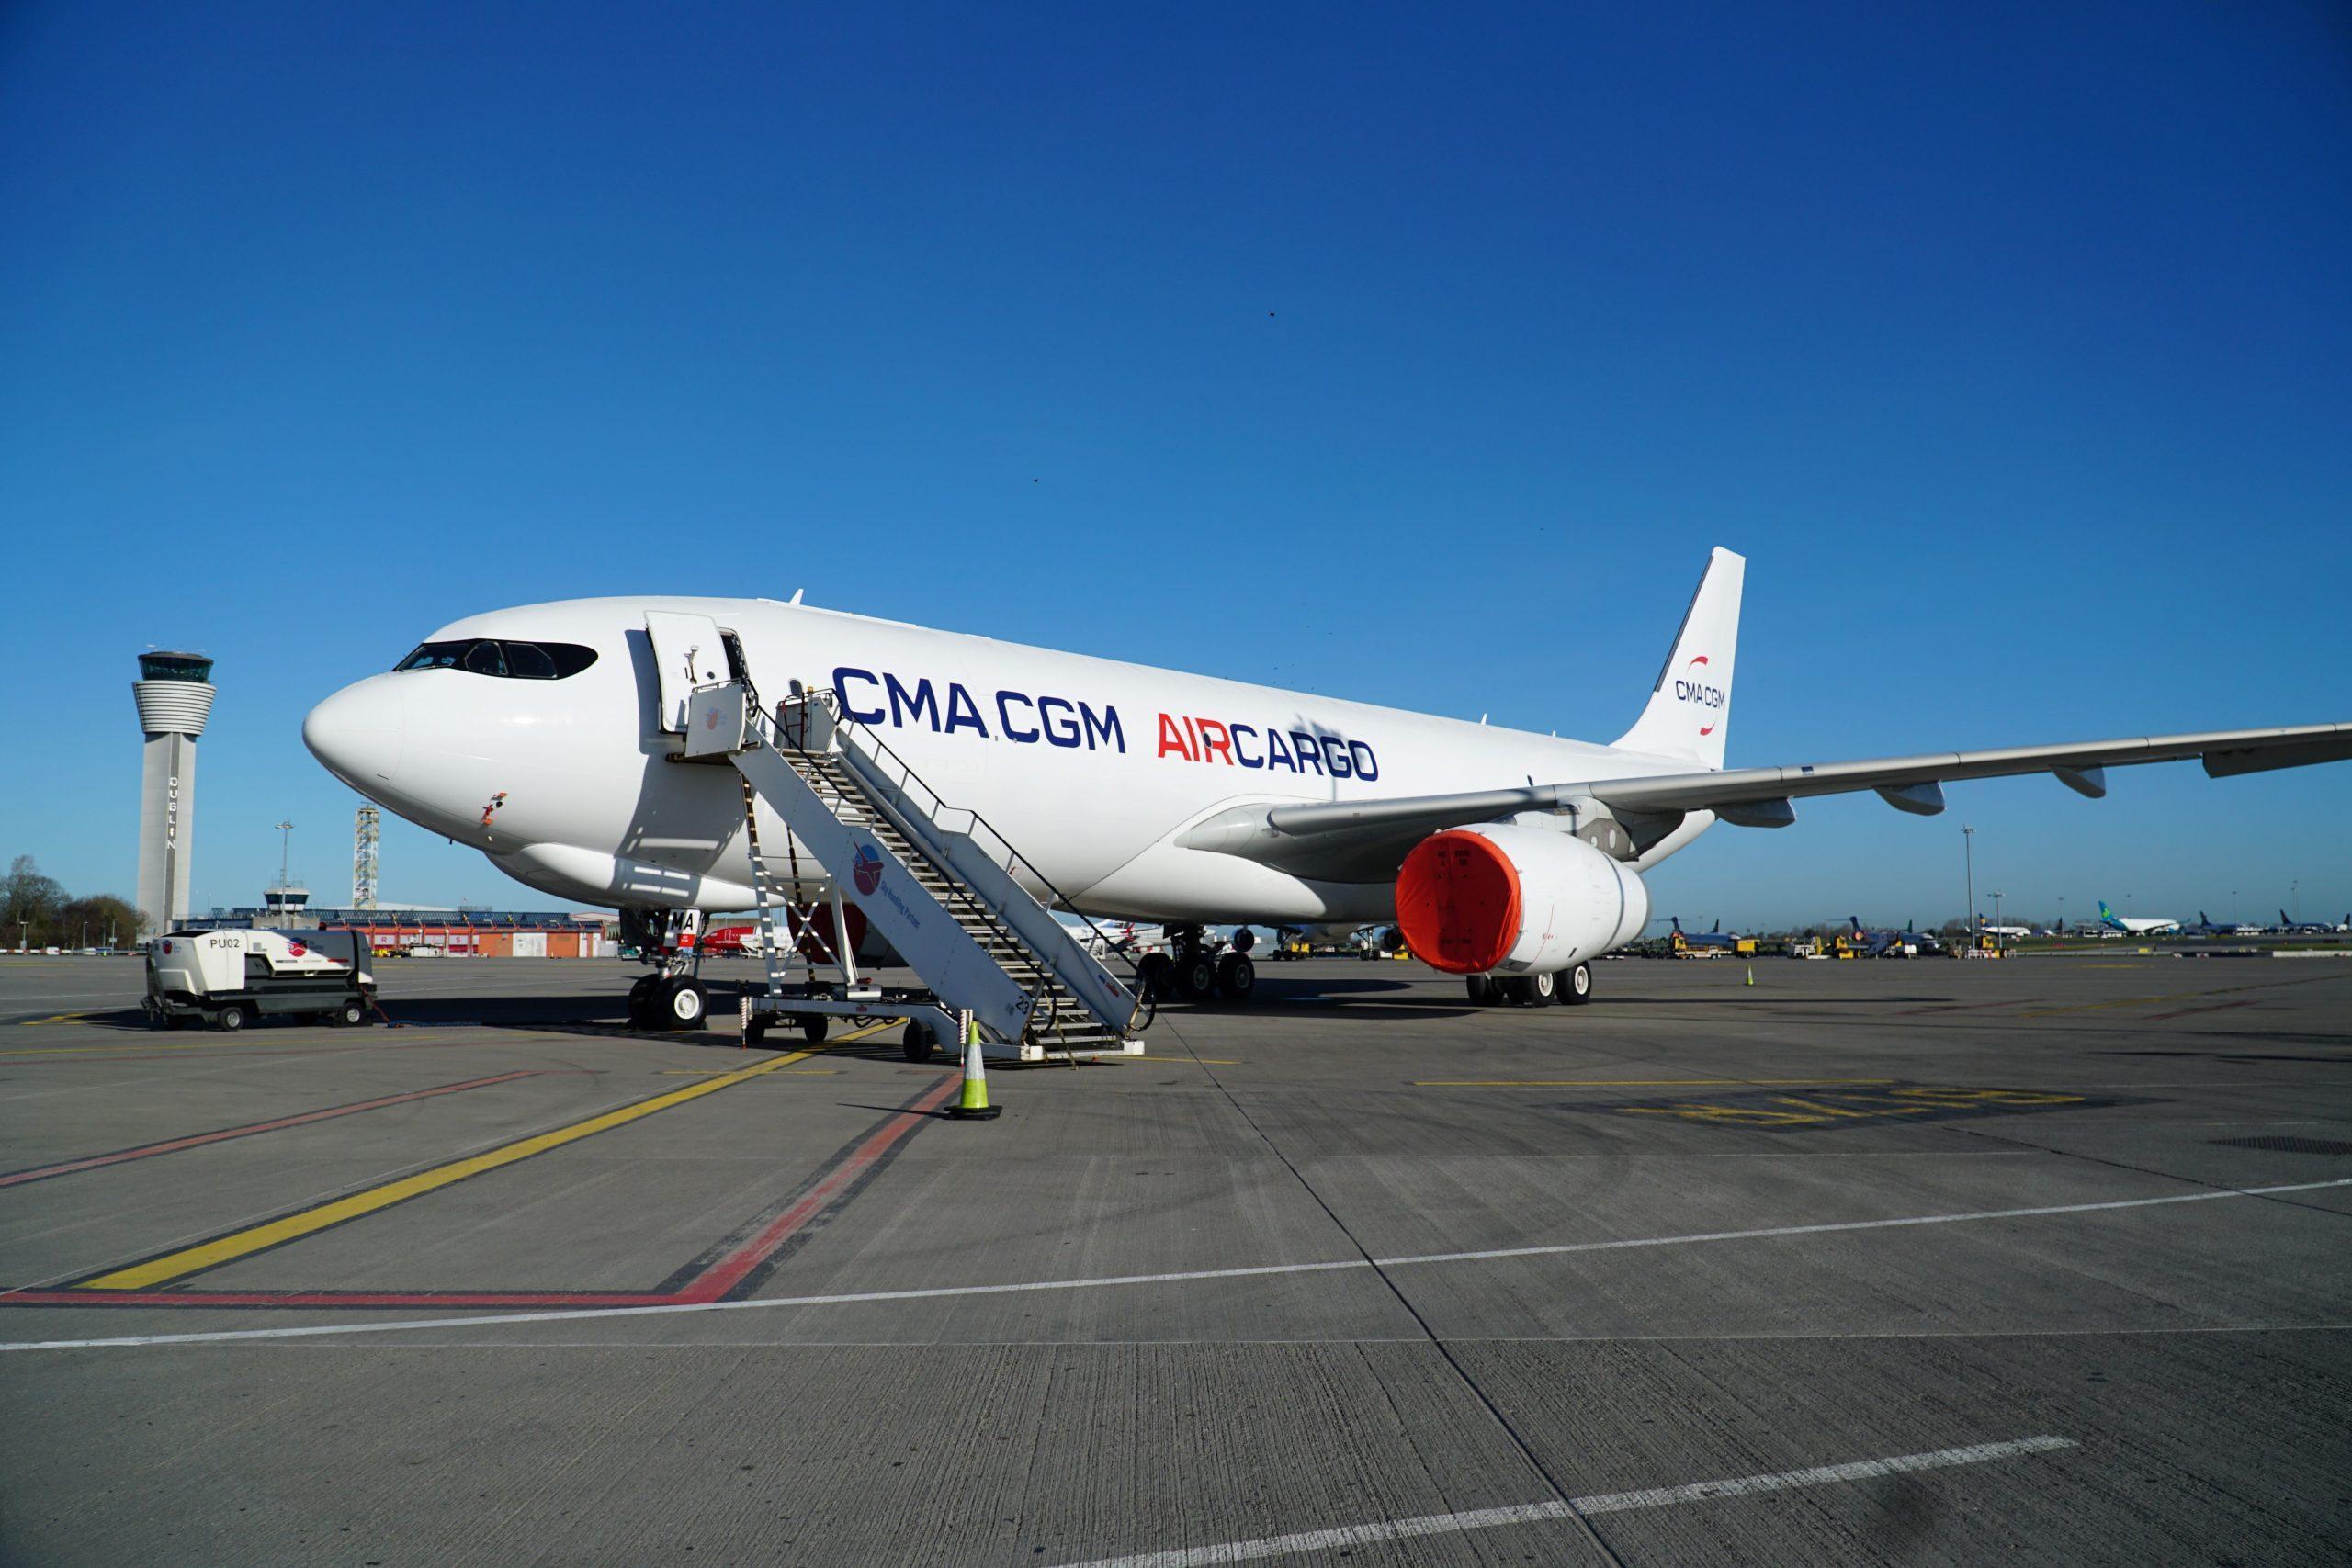 ECS Group to Market CMA CGM AIR CARGO’s Offerings